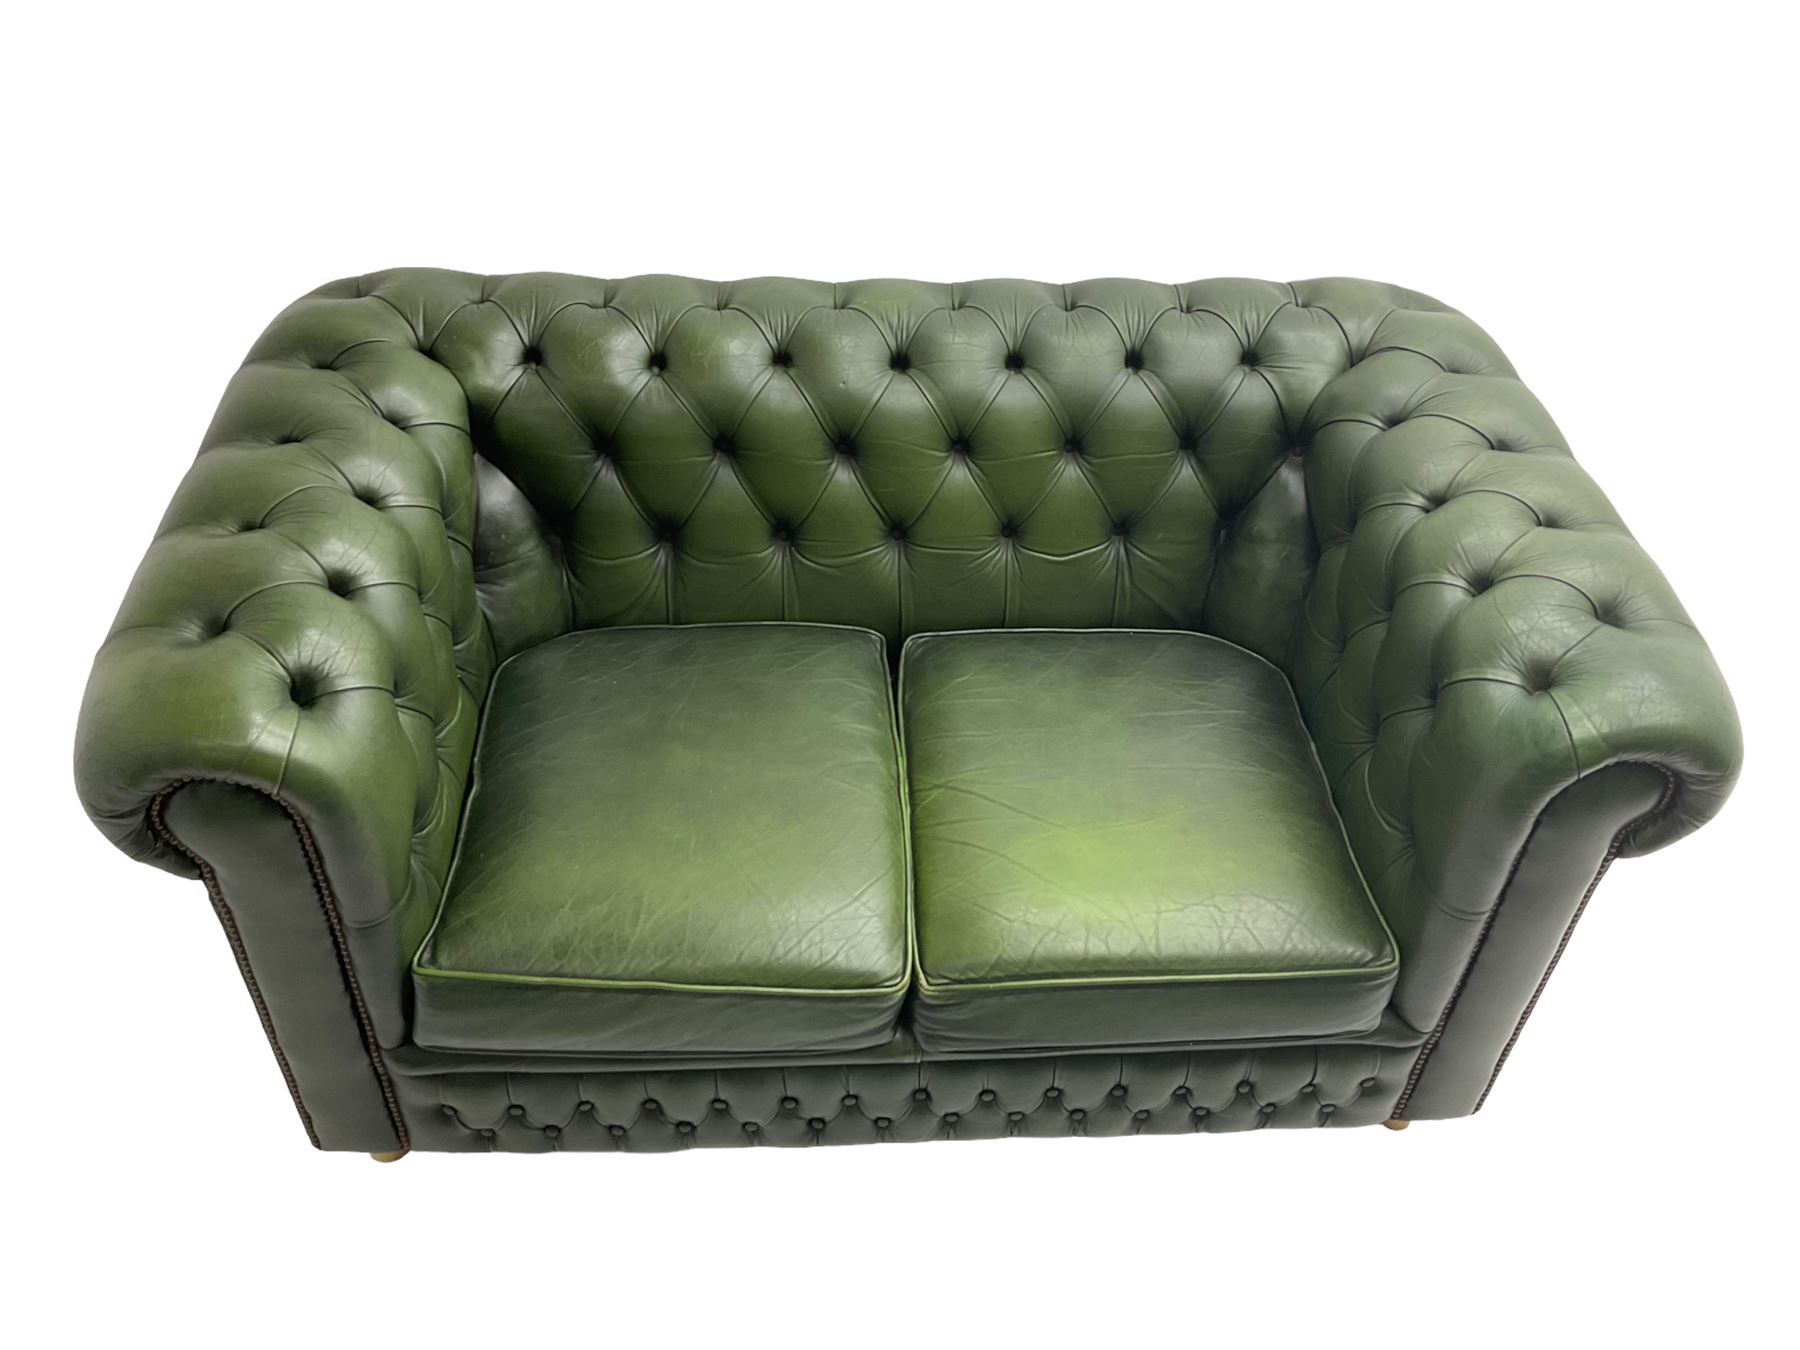 Chesterfield style two seat sofa upholstered in buttoned green leather with stud work - Image 4 of 5